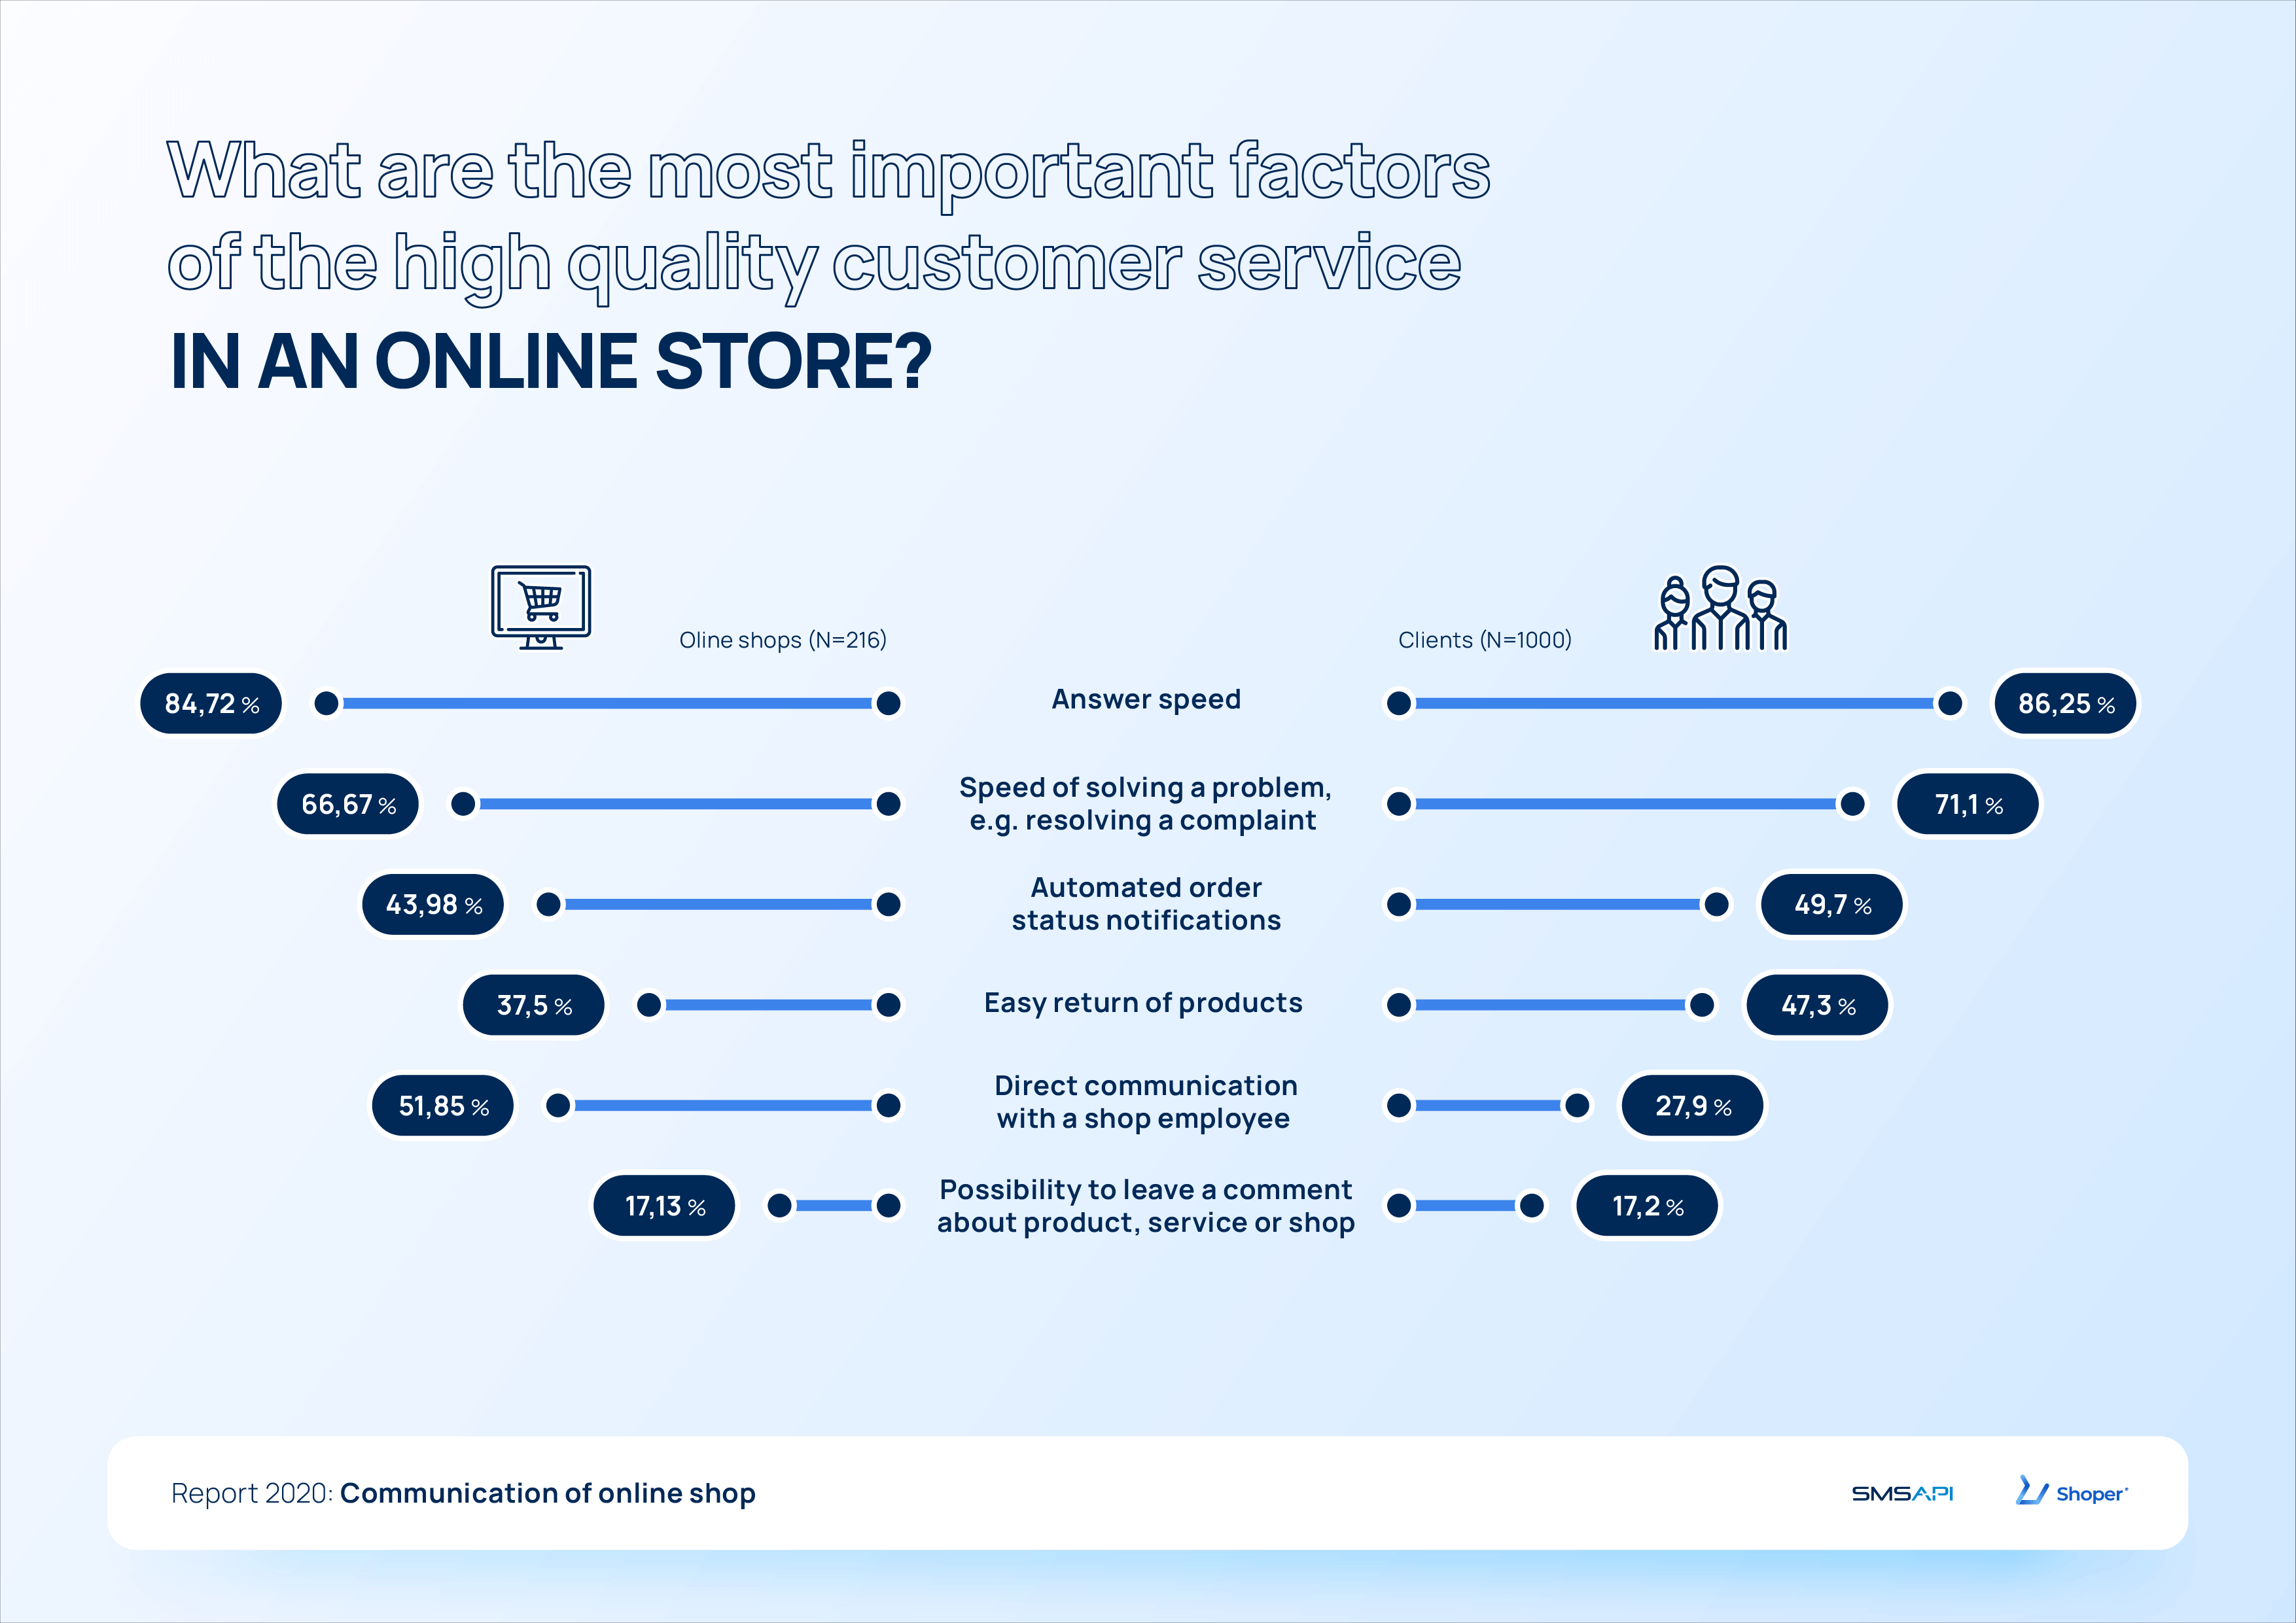 What are the most important factors of the high quality customer service in an online shop? 2020 e-commerce report